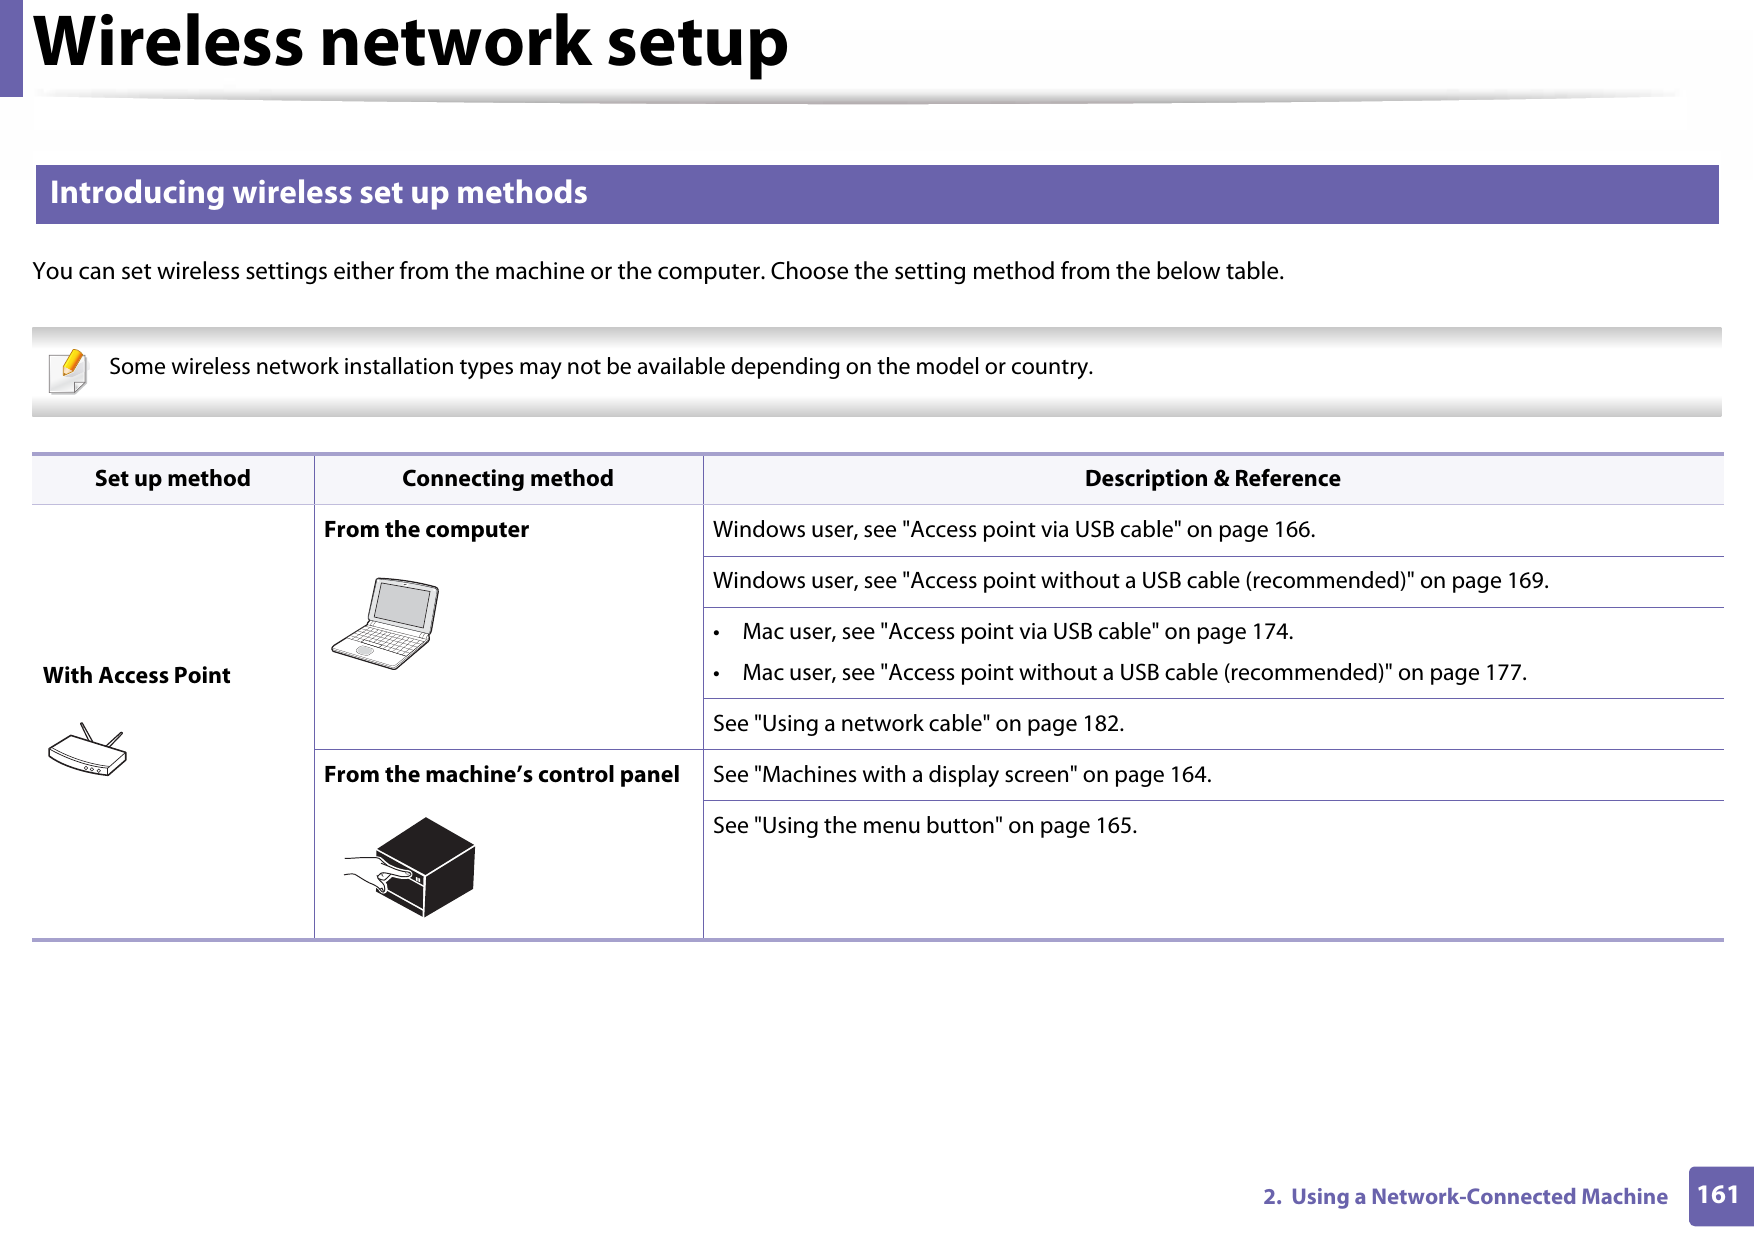 Wireless network setup1612.  Using a Network-Connected Machine13 Introducing wireless set up methodsYou can set wireless settings either from the machine or the computer. Choose the setting method from the below table. Some wireless network installation types may not be available depending on the model or country.  Set up method Connecting method Description &amp; ReferenceWith Access PointFrom the computer Windows user, see &quot;Access point via USB cable&quot; on page 166.Windows user, see &quot;Access point without a USB cable (recommended)&quot; on page 169.• Mac user, see &quot;Access point via USB cable&quot; on page 174.• Mac user, see &quot;Access point without a USB cable (recommended)&quot; on page 177.See &quot;Using a network cable&quot; on page 182.From the machine’s control panel See &quot;Machines with a display screen&quot; on page 164.See &quot;Using the menu button&quot; on page 165.